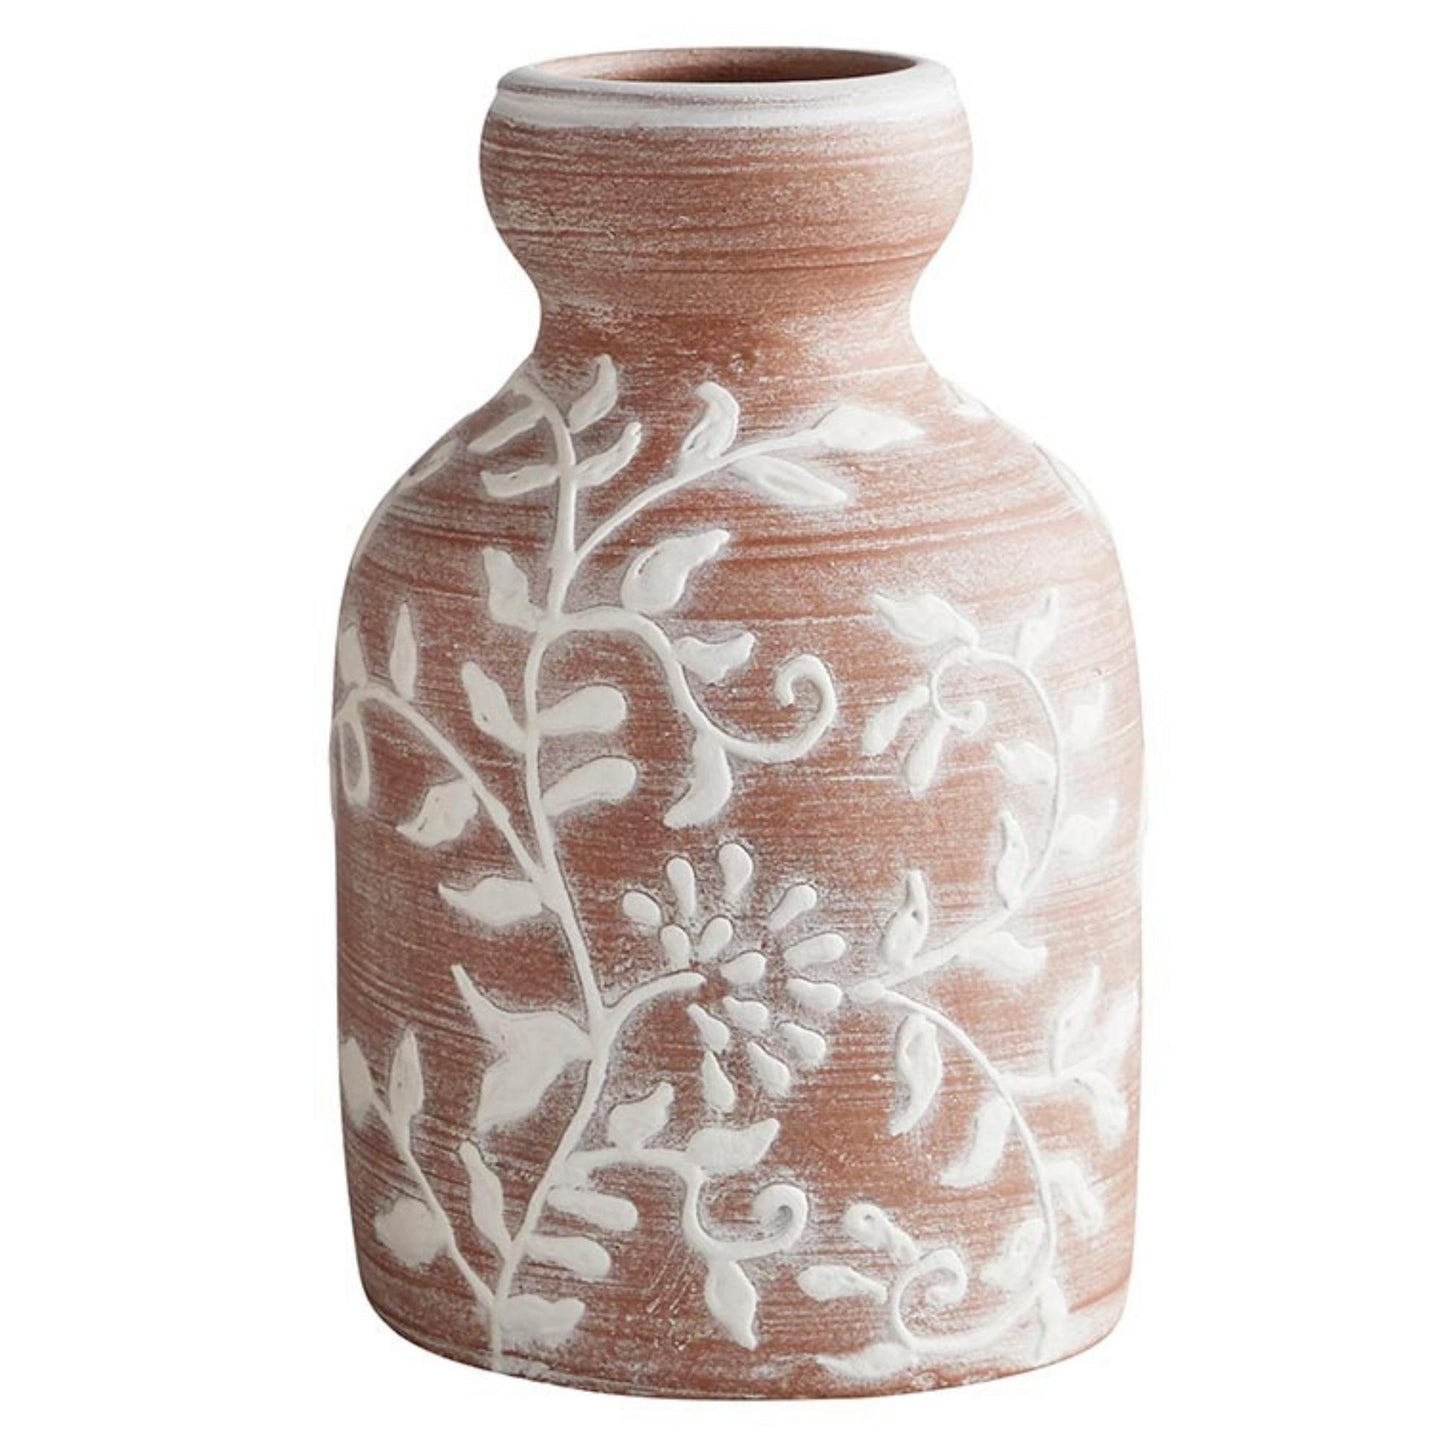 Earthy Terracotta Vases with Textured White Floral Design - 3 Designs to Choose From | Short Terra Cotta Vase Shown | InsideOutCatalog.com